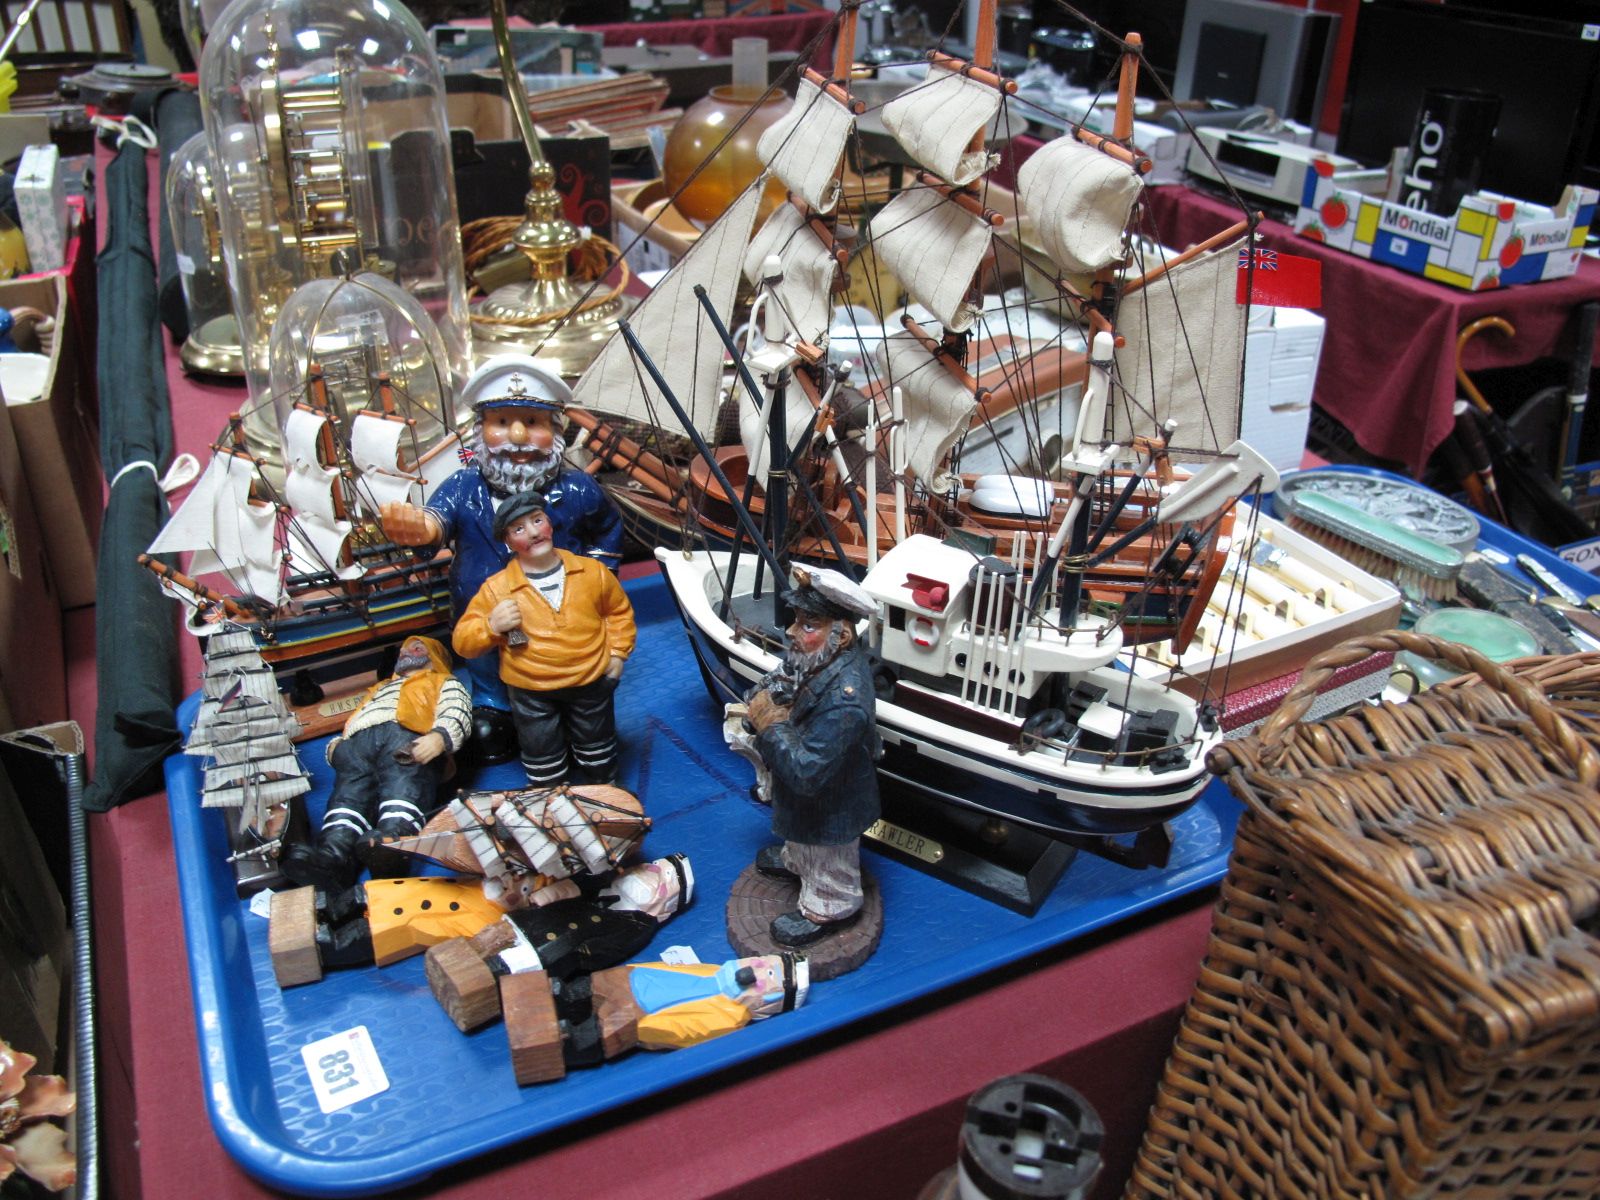 Five Model Sailing Ships / Trawlers, mounted on stands, and seven resin and carved wooden sailors.